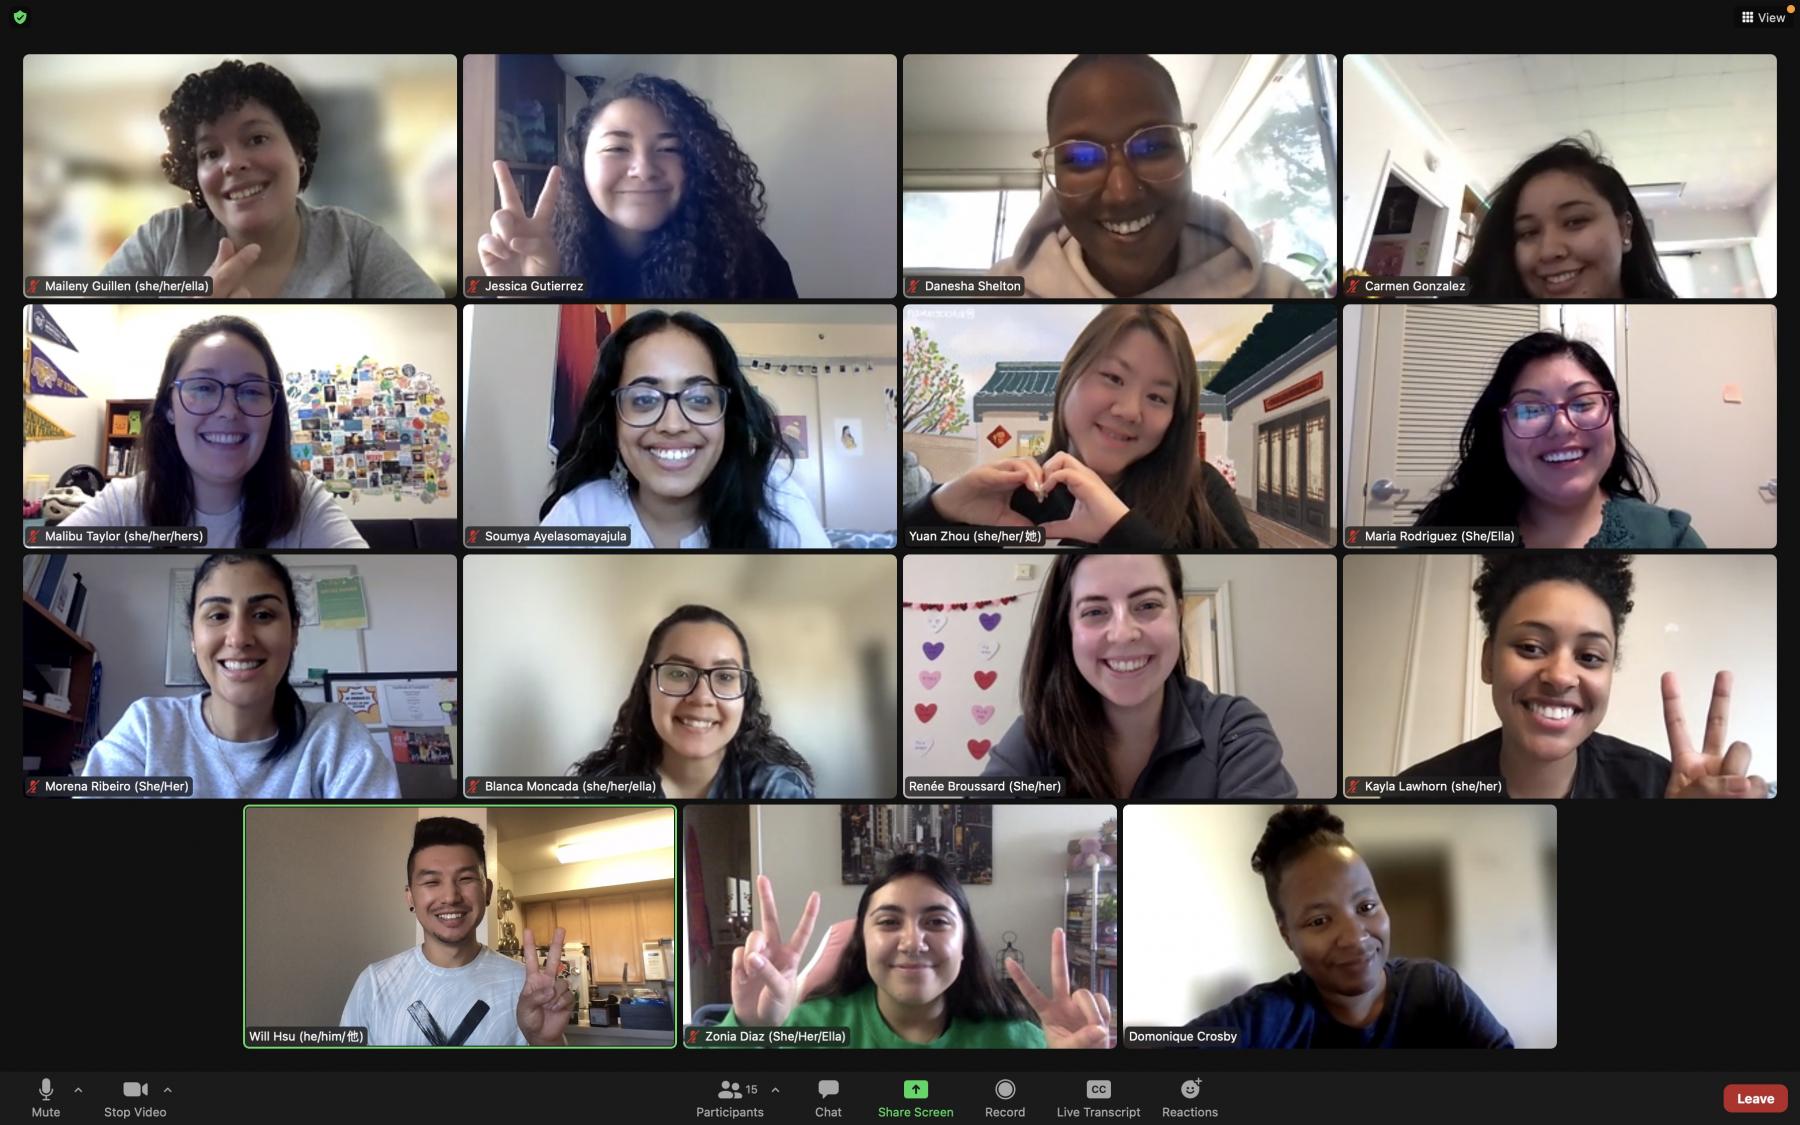 A screen shot of the University of San Francisco Residential Life Team on a Zoom meeting.